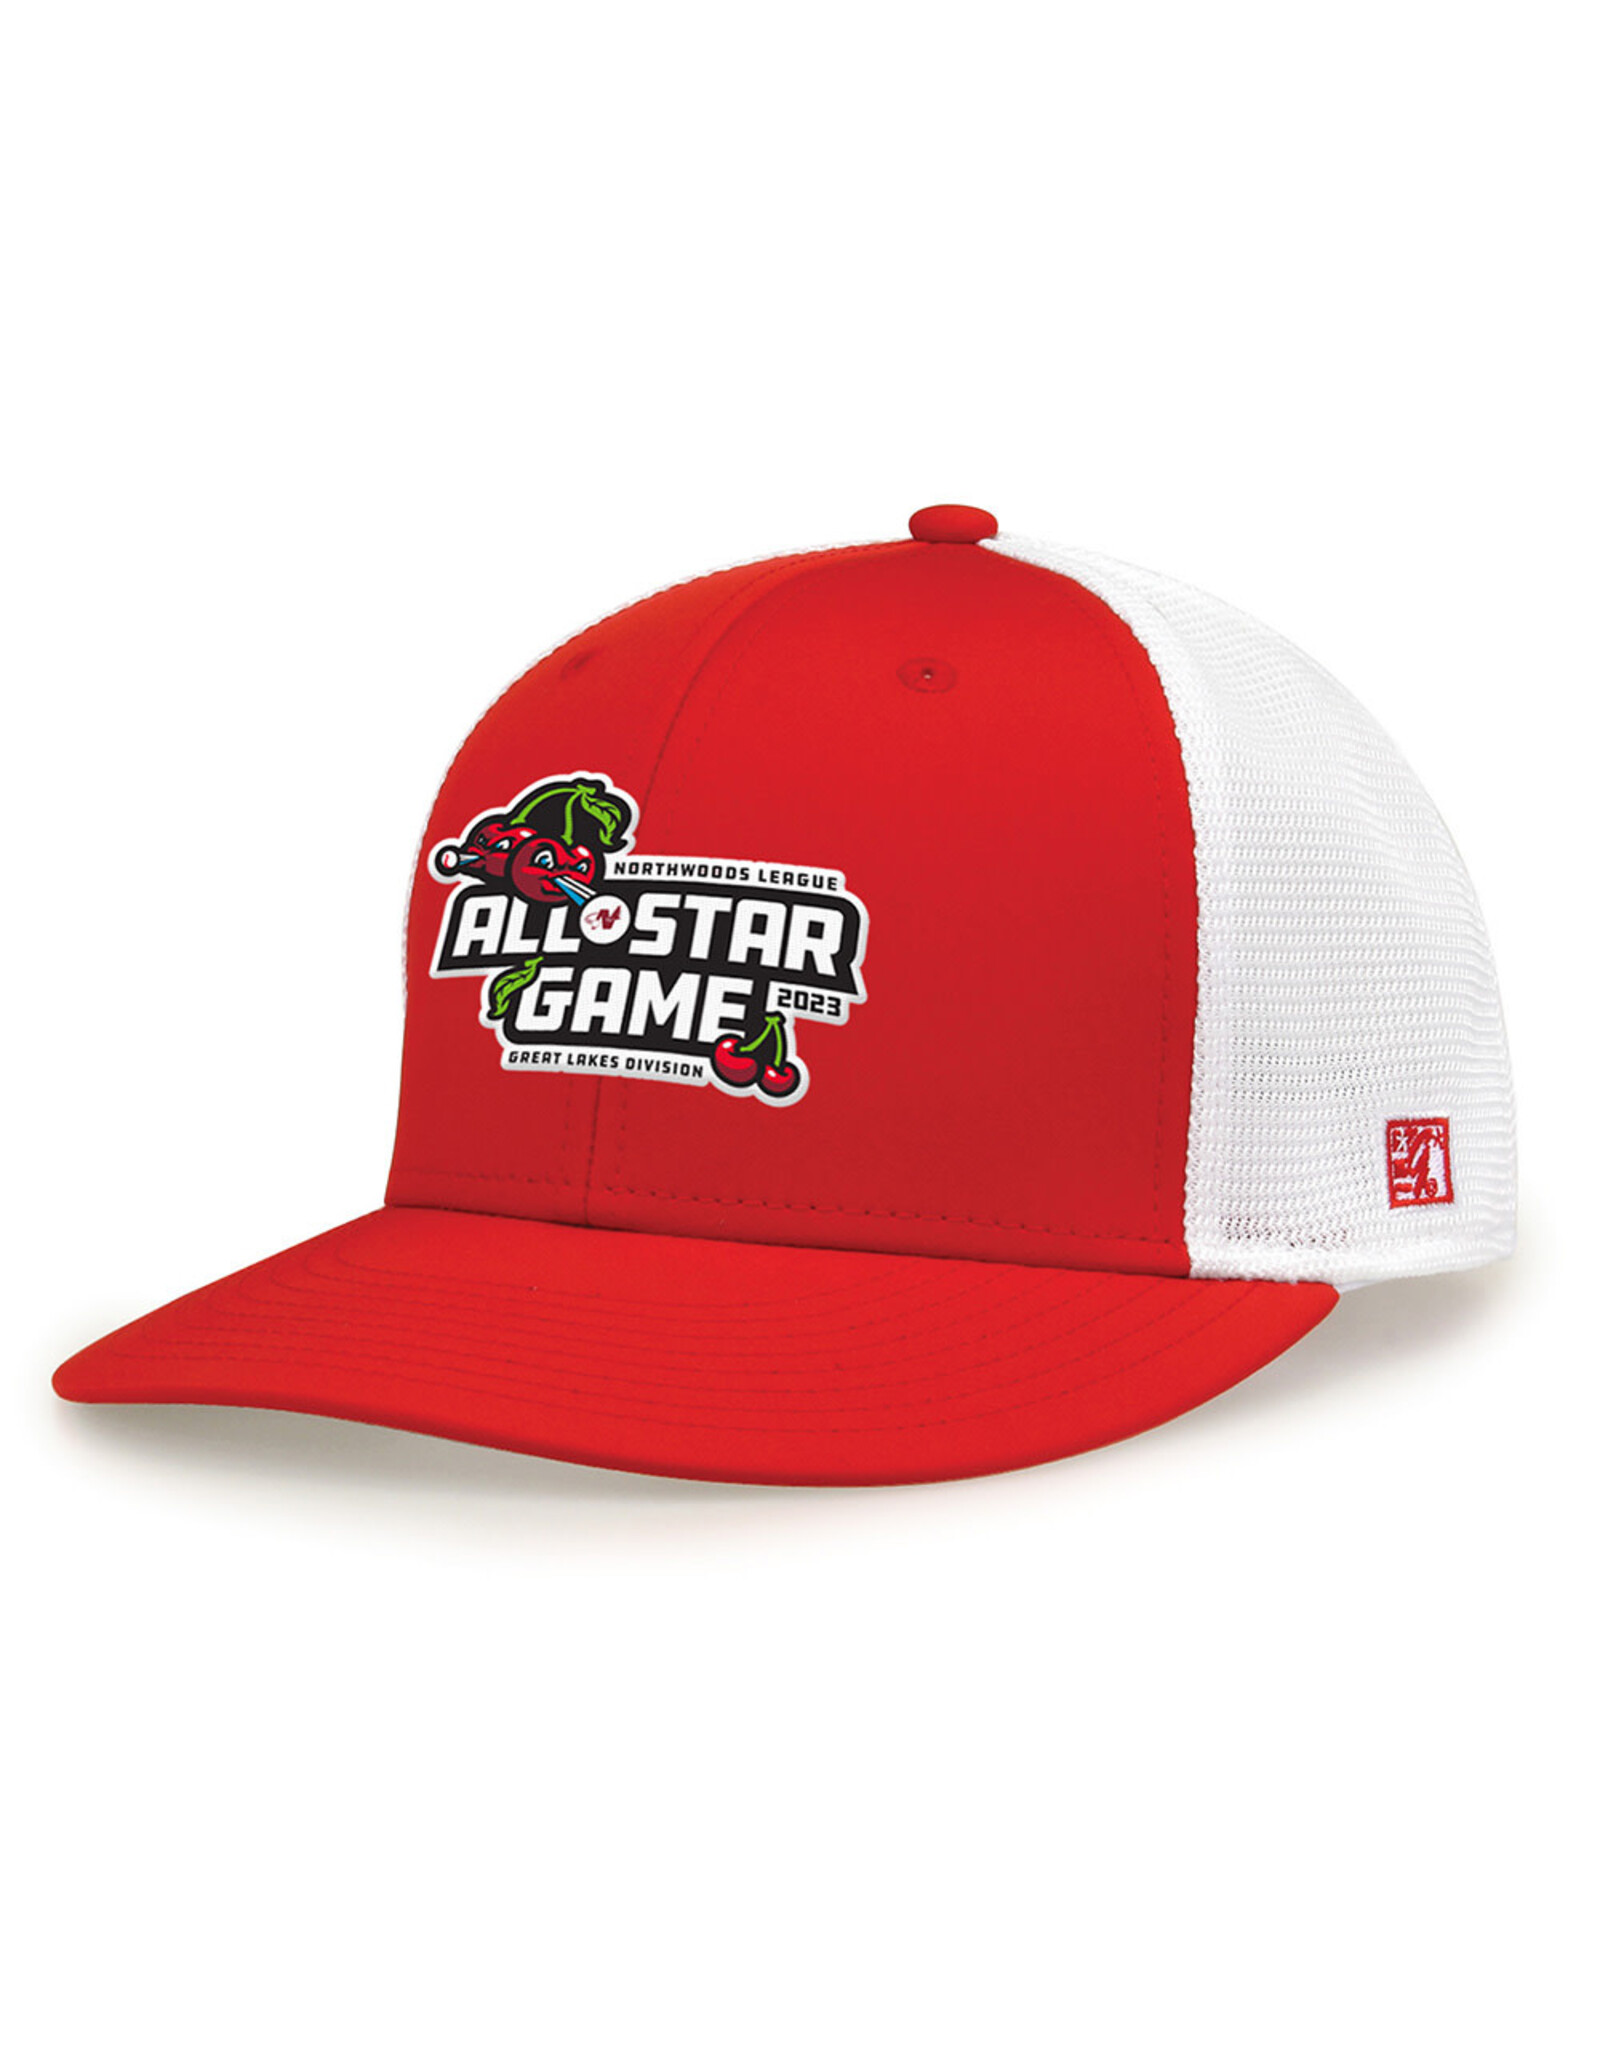 The Game 2023 Northwoods League All-Star Game Red Front/White Back Cap